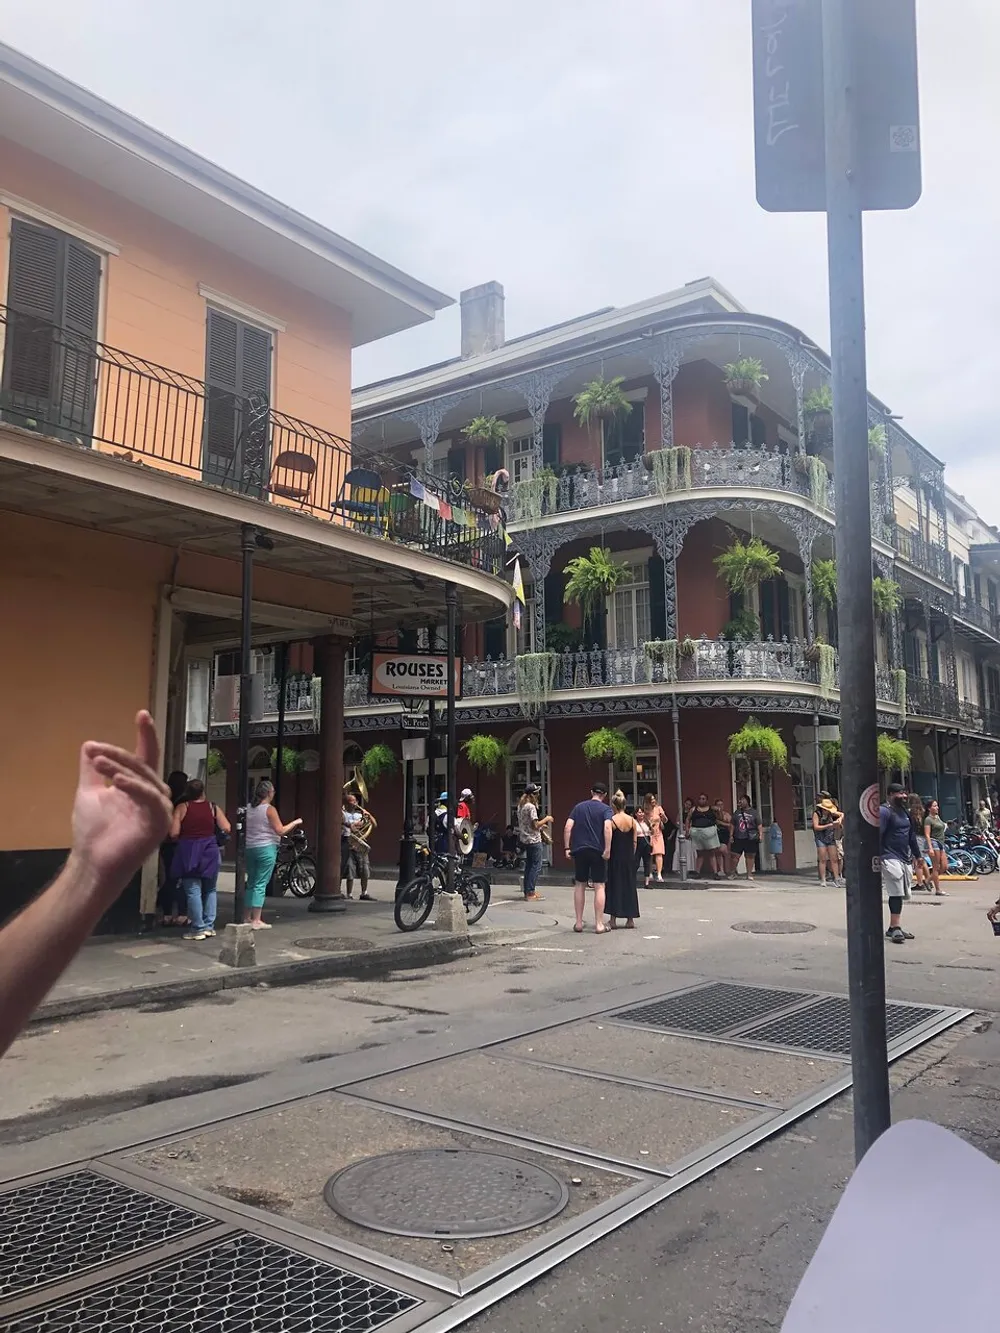 The image captures a lively street scene with people walking and classic wrought-iron balconies in what appears to be the French Quarter of New Orleans